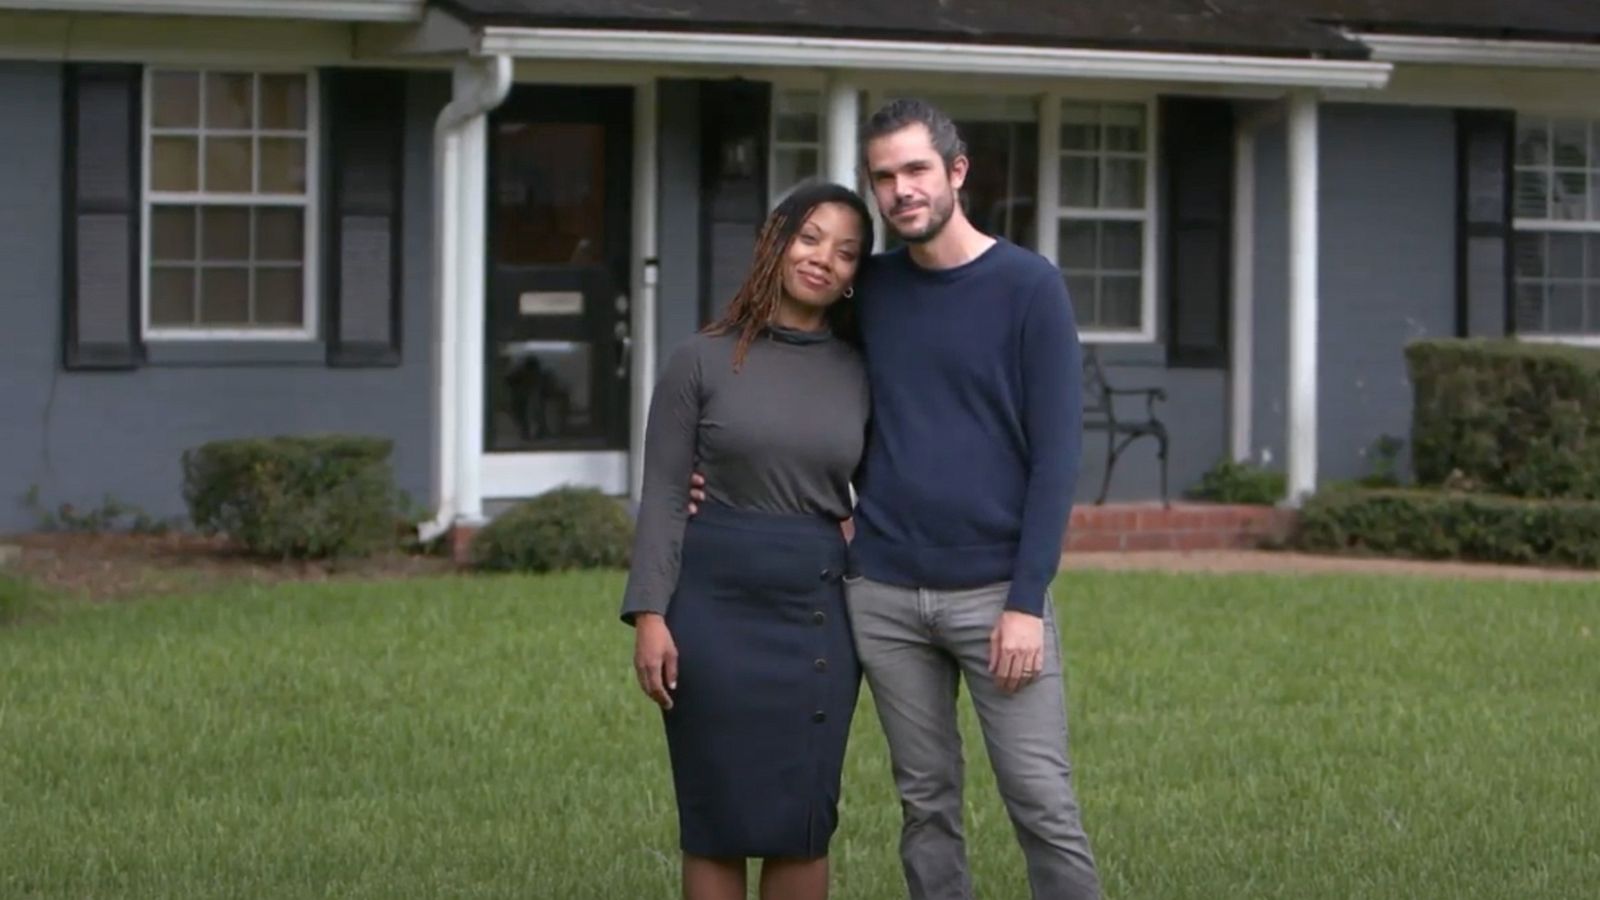 Couple says they faced discrimination